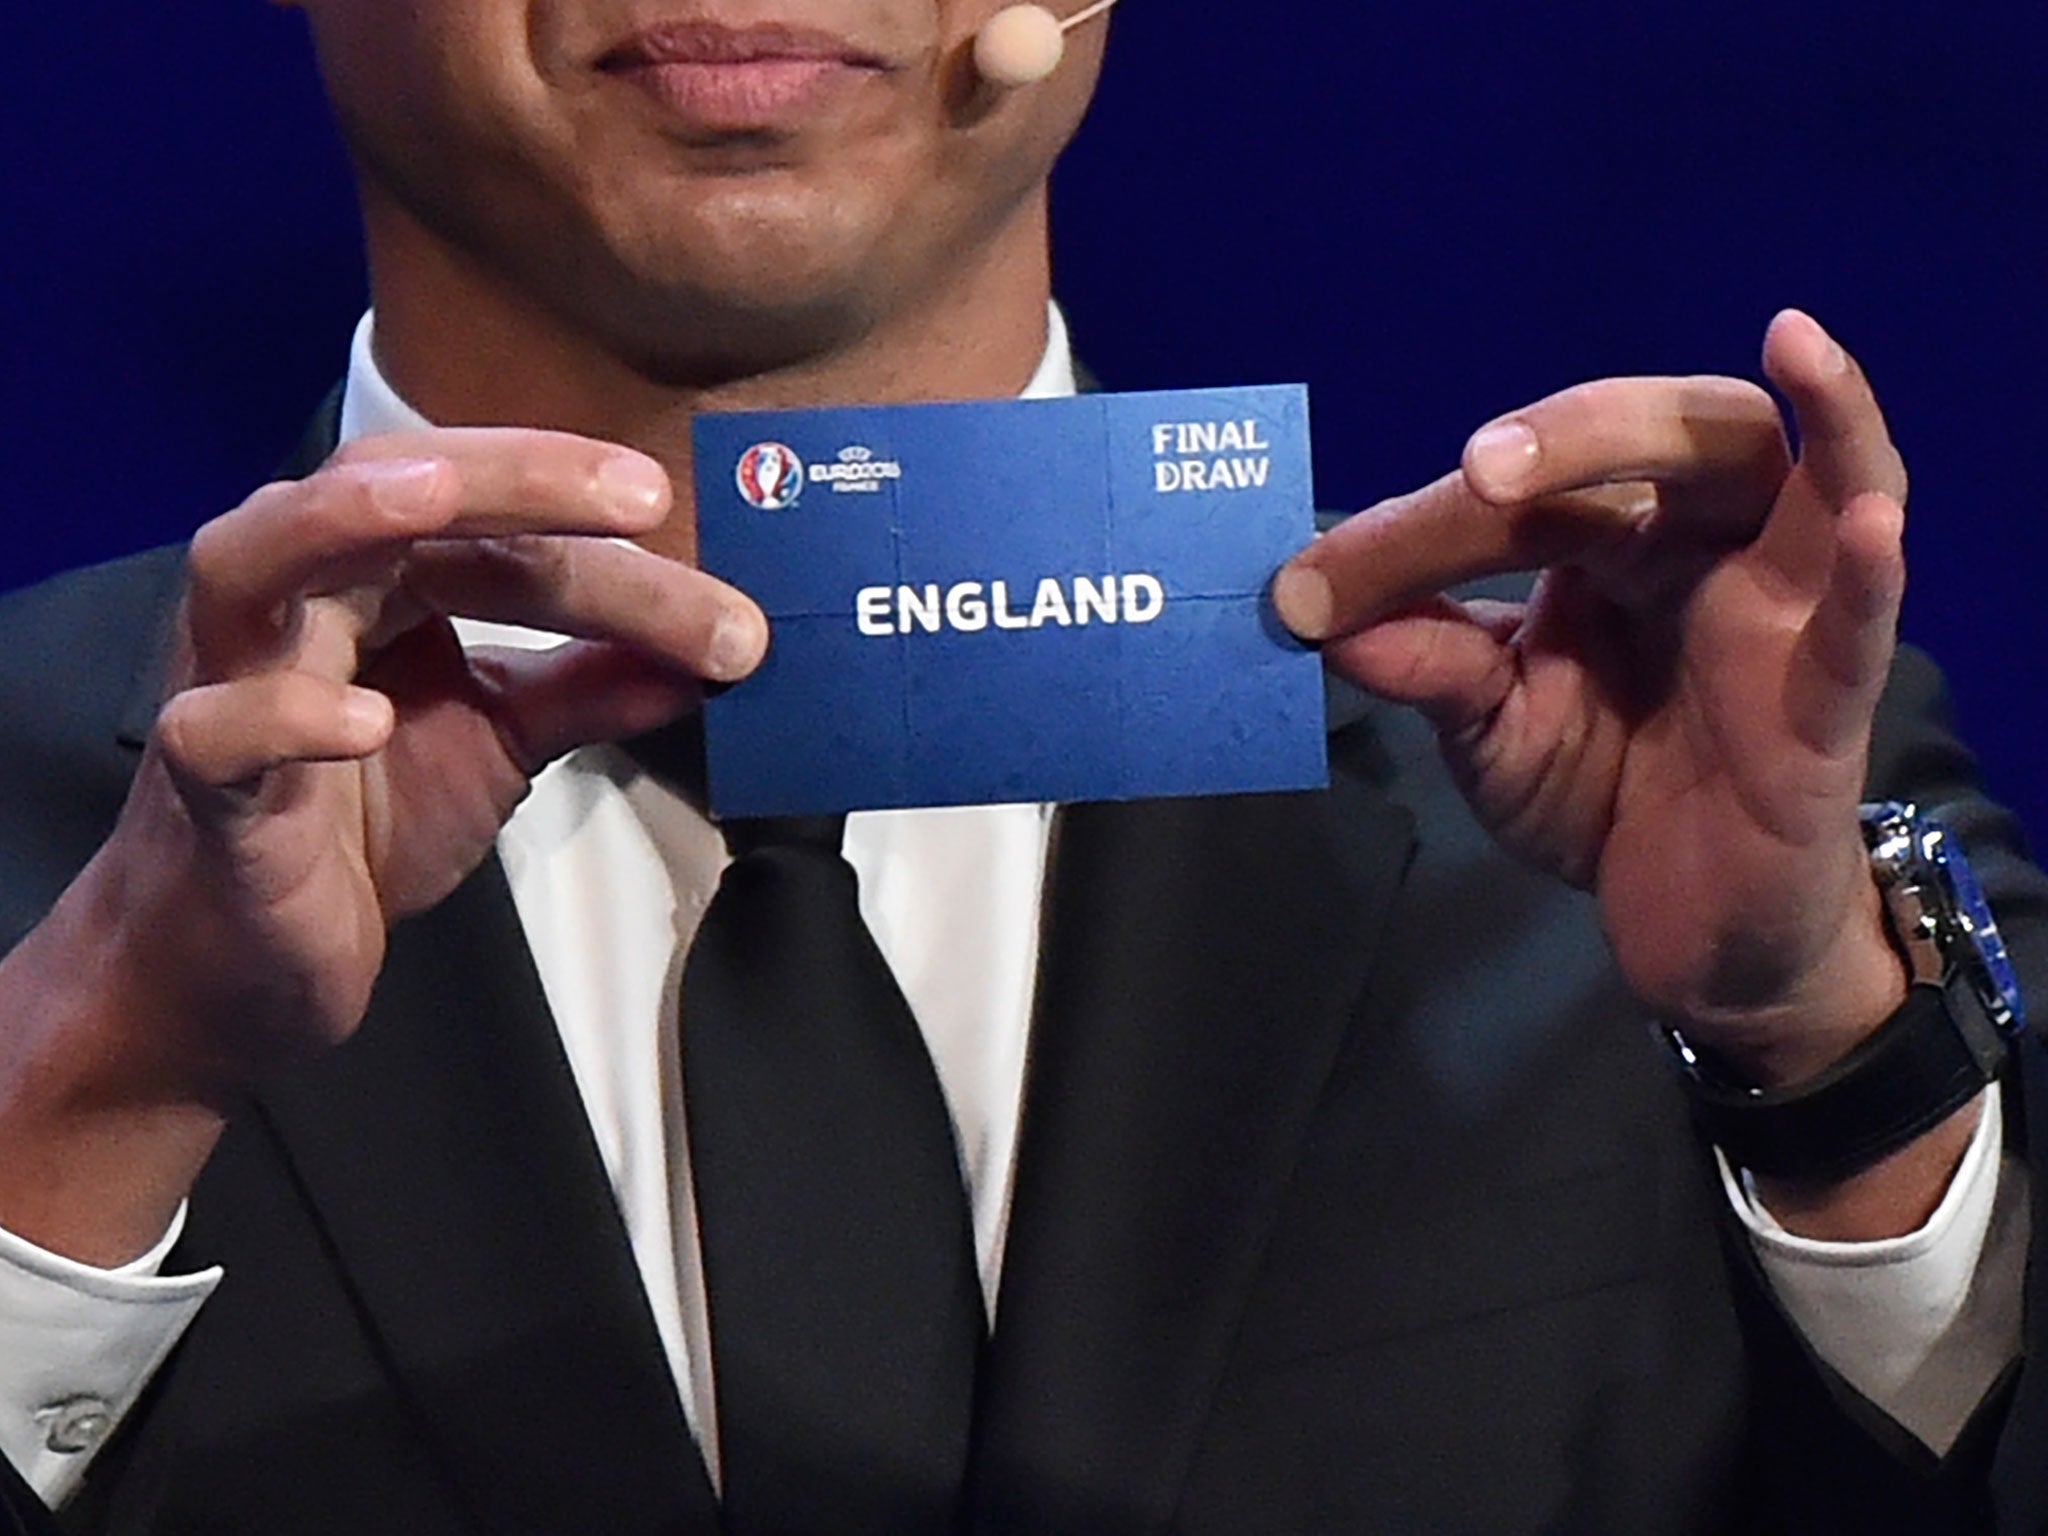 England and Wales were drawn in the same group